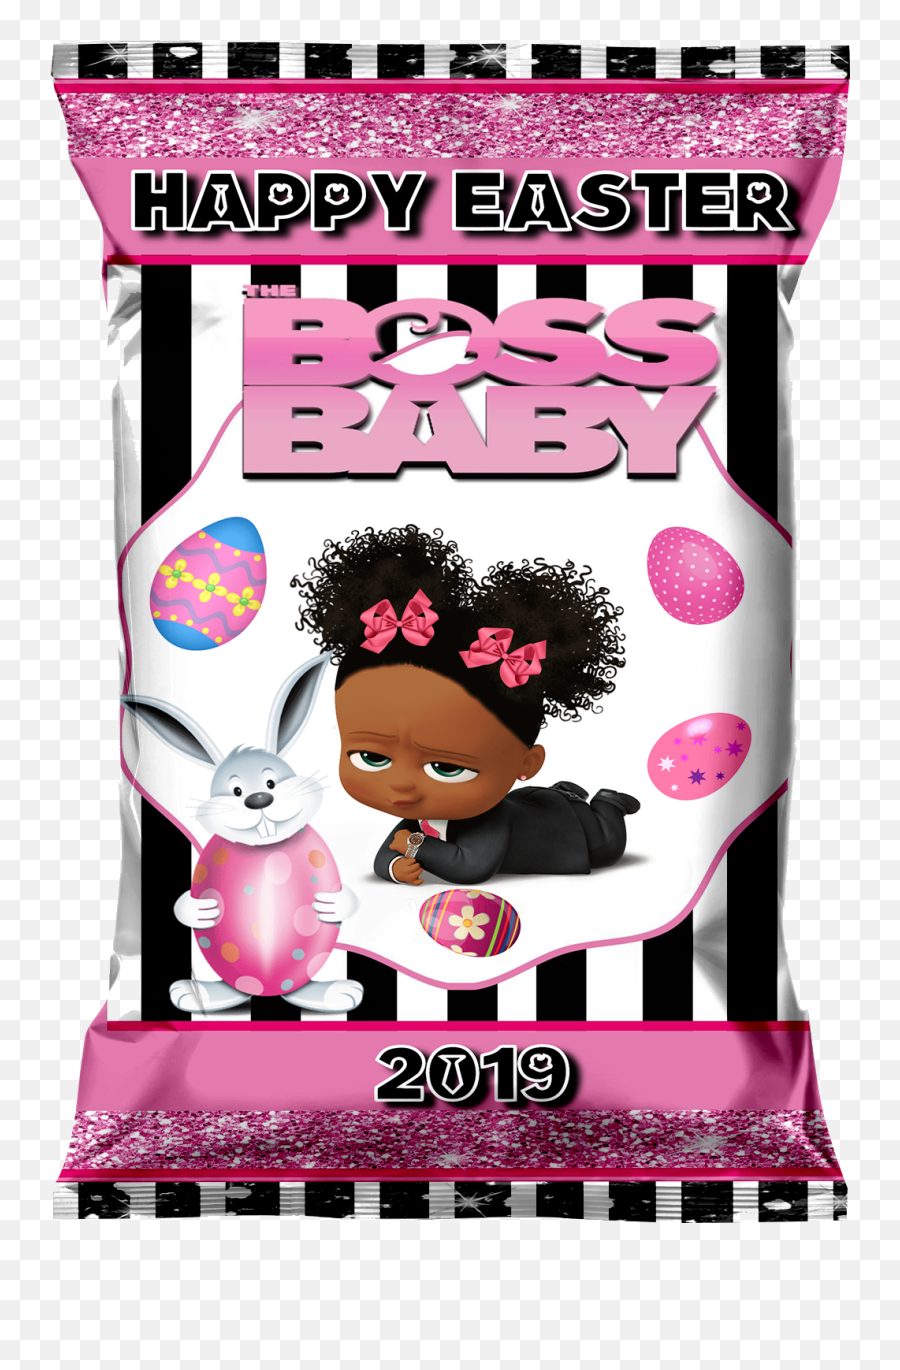 Editable Pink Boss Baby Easter Chip Bag U0026 Juice Pouch Label - Pink Free Boss Baby Printables Png,Boss Baby Png